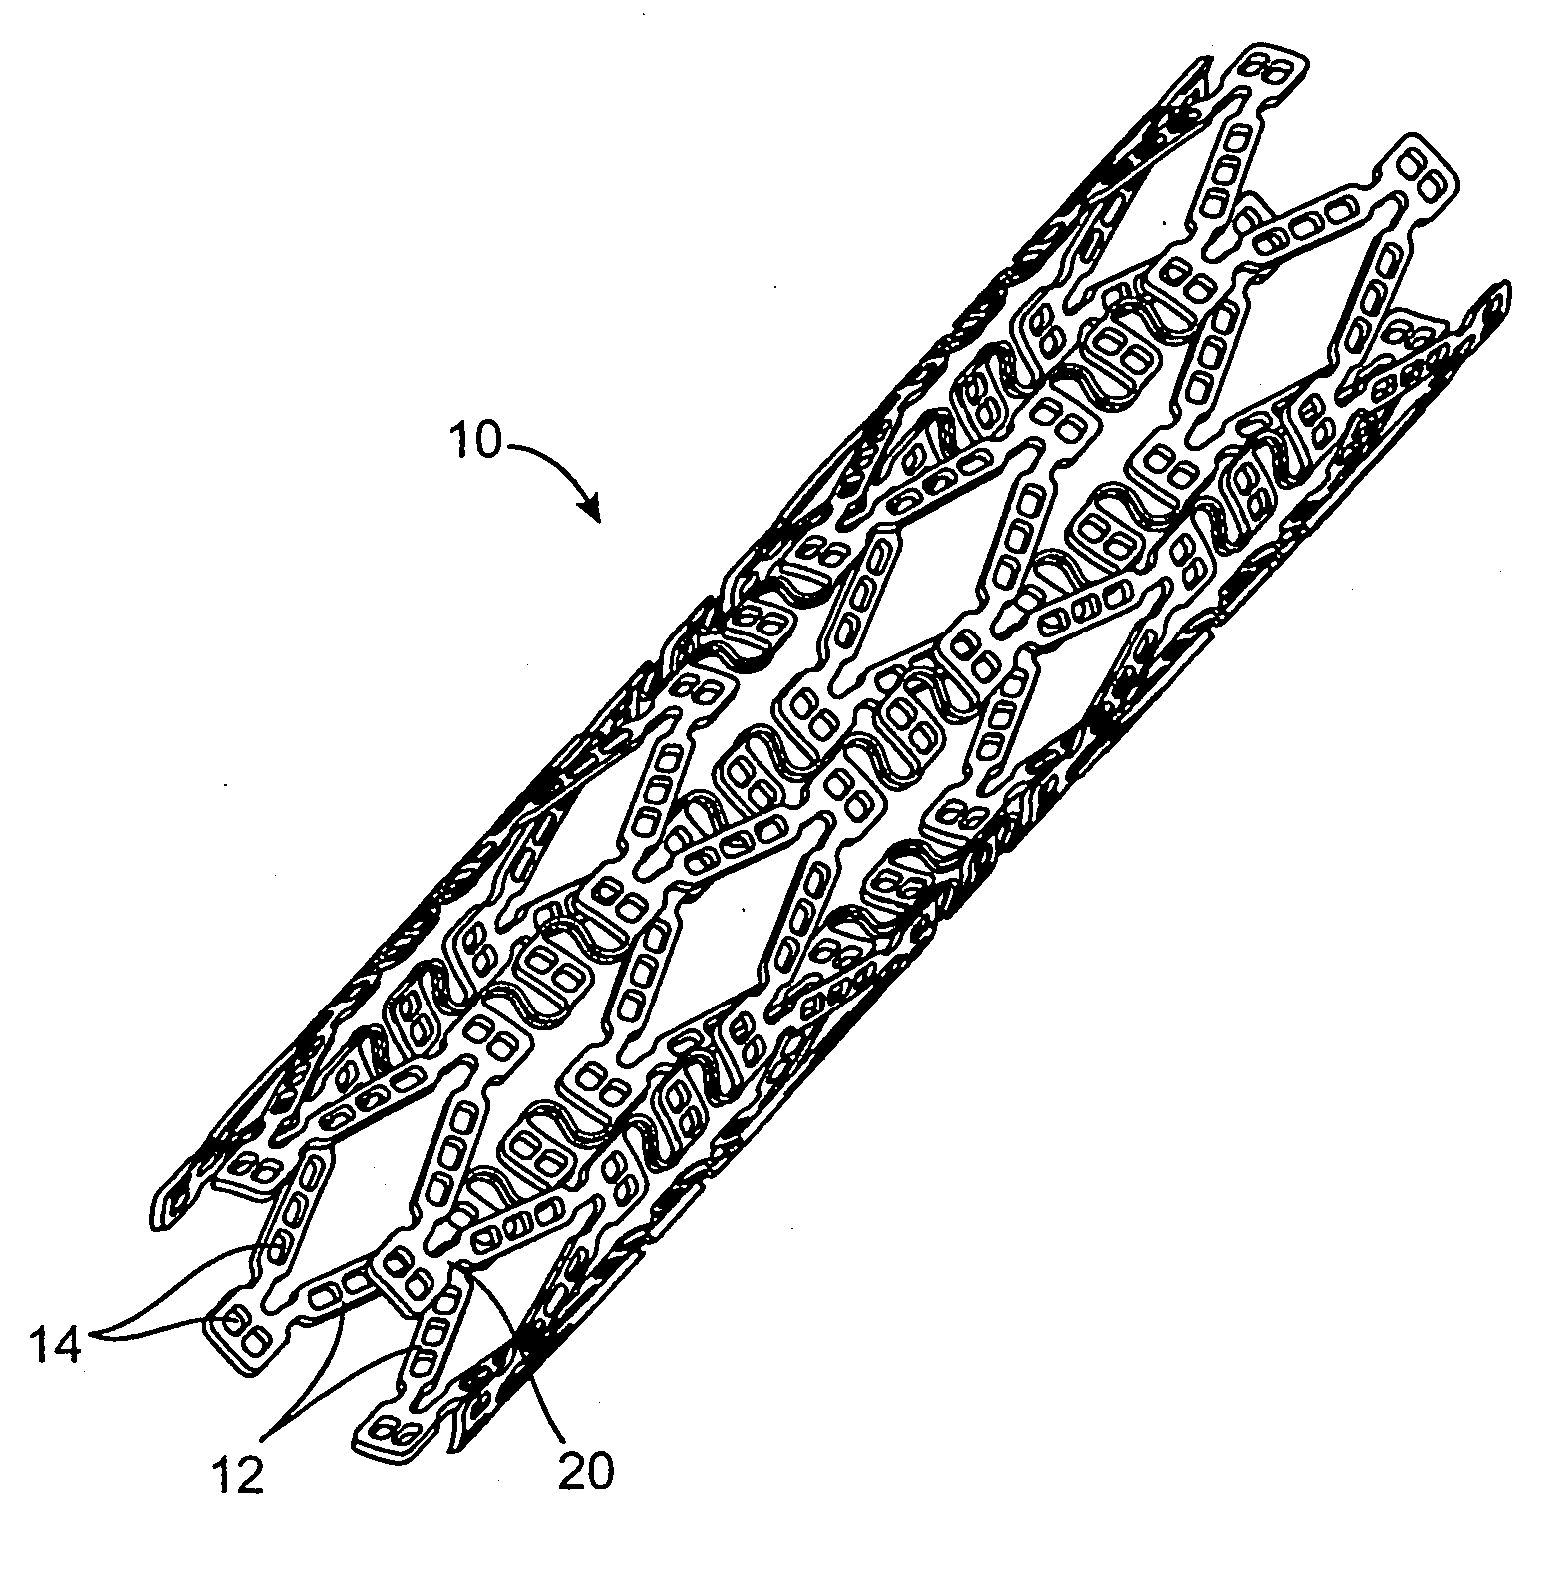 Methods of delivering anti-restenotic agents from a stent